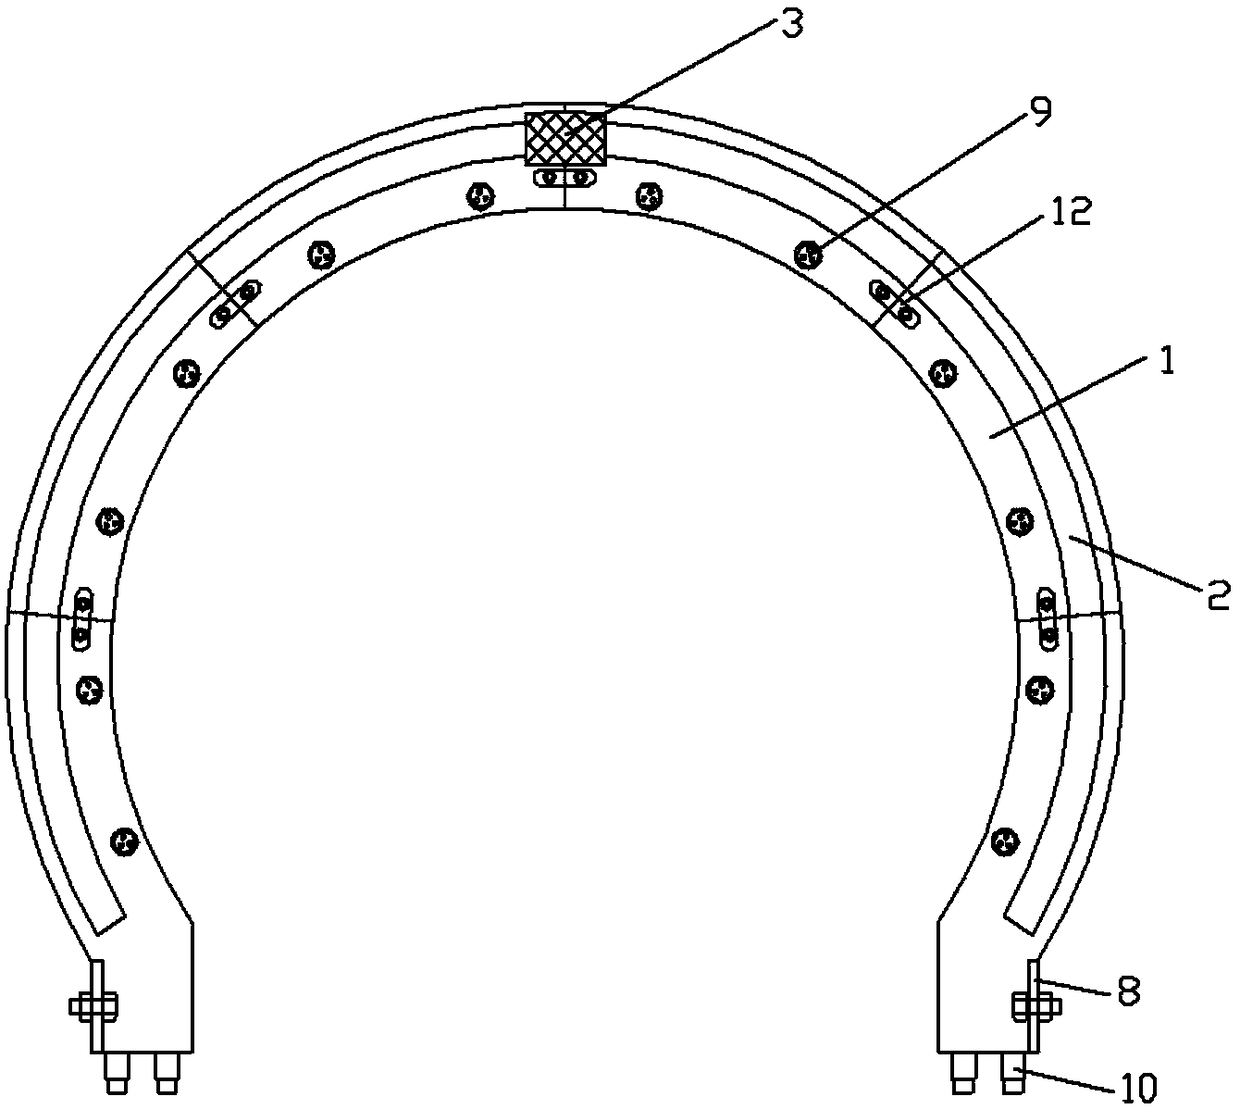 Supporting frame for tunnel detection equipment